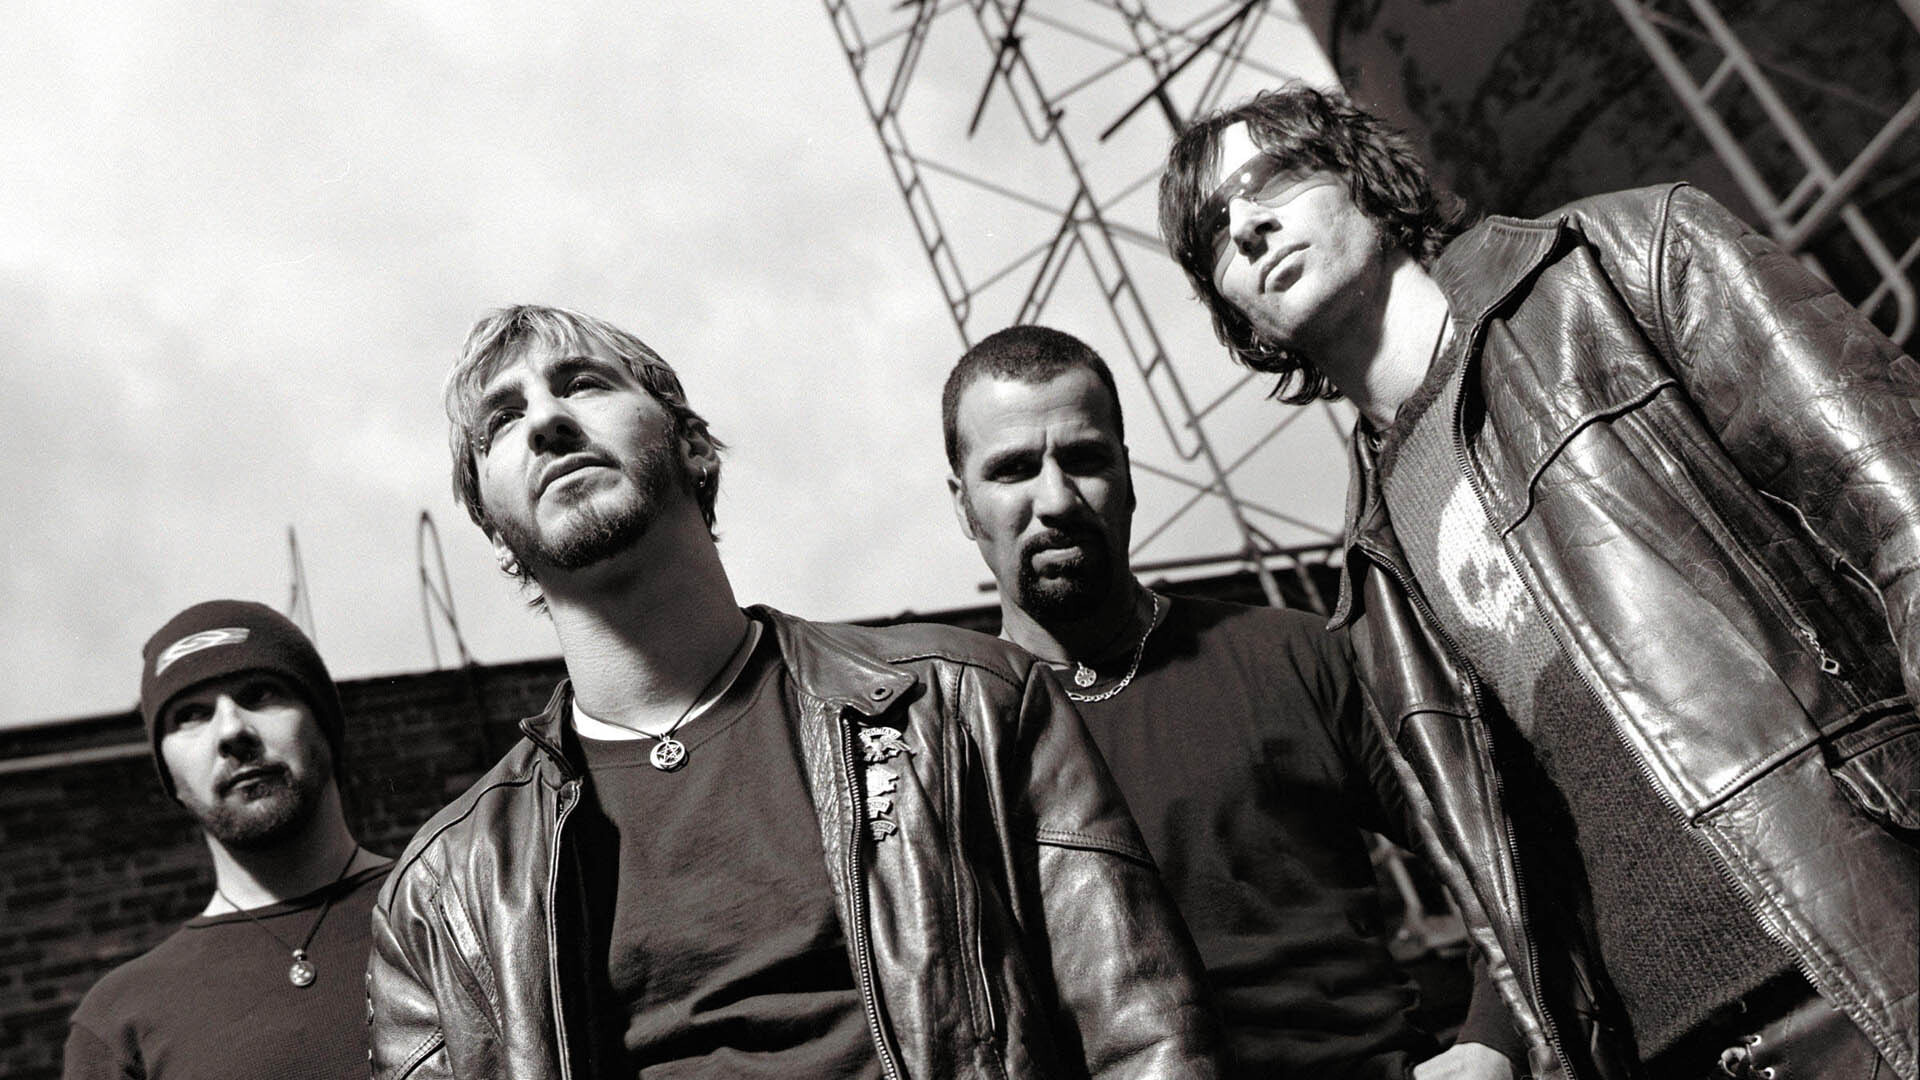 Godsmack: The band that released three consecutive number-one albums on the Billboard 200. 1920x1080 Full HD Background.